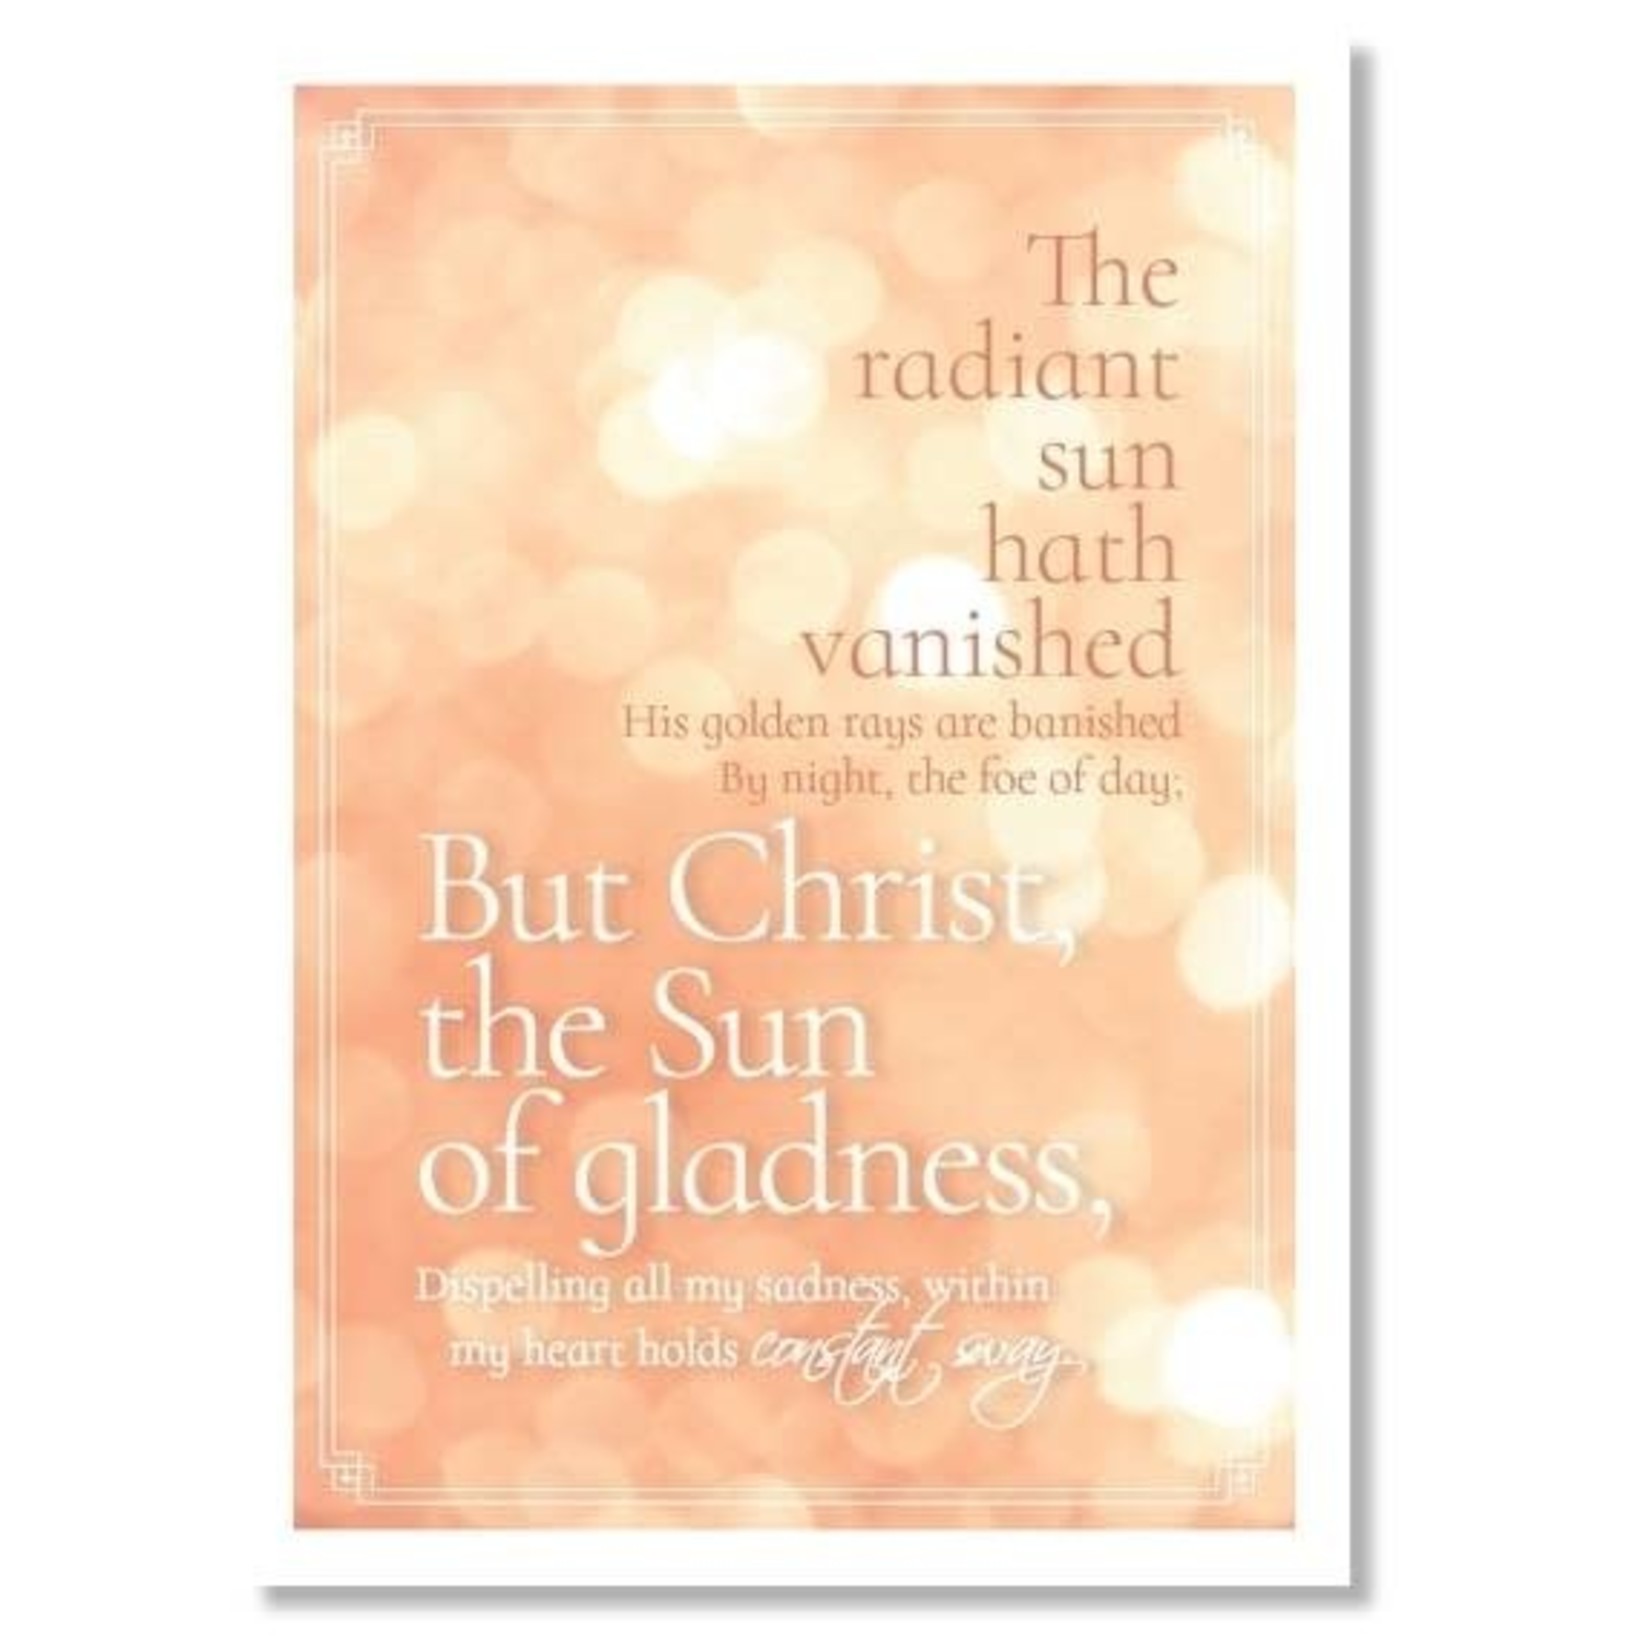 Hymns In My Heart Hymns In My Heart - 5x7" Greeting Card - Friendship - The Radiant Sun